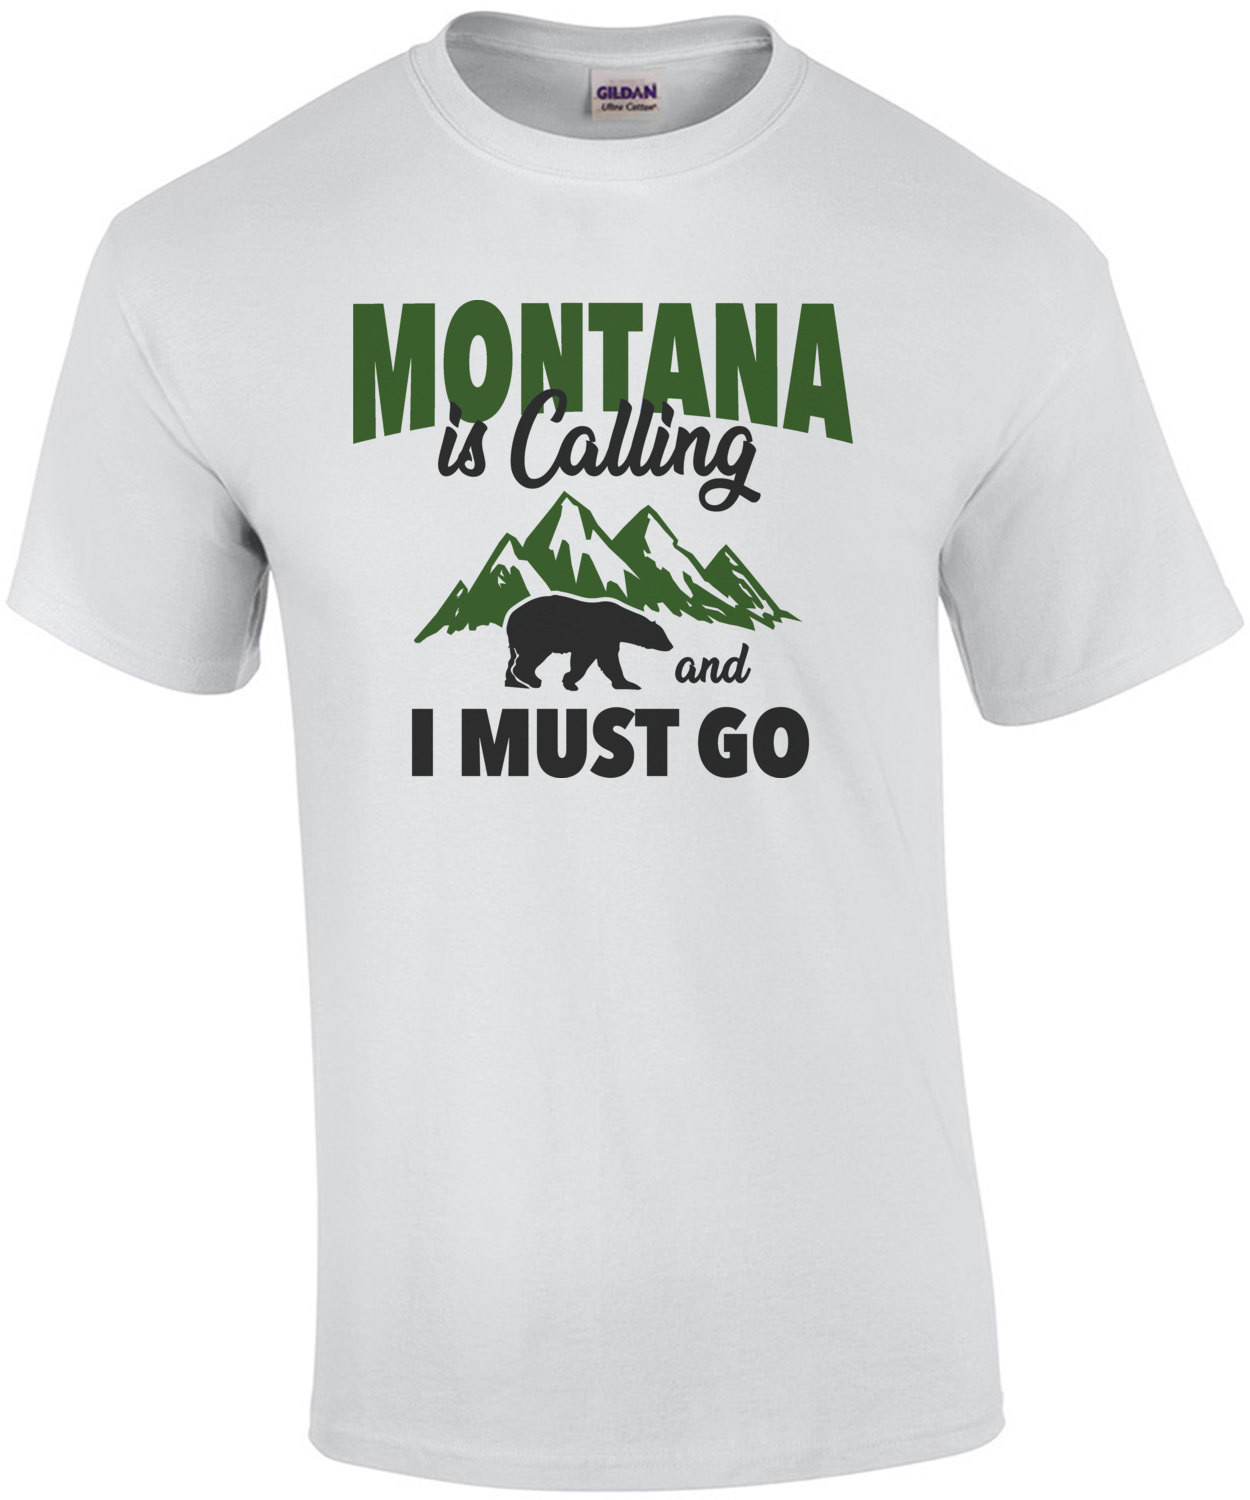 Montana is calling and I must go - Montana T-Shirt